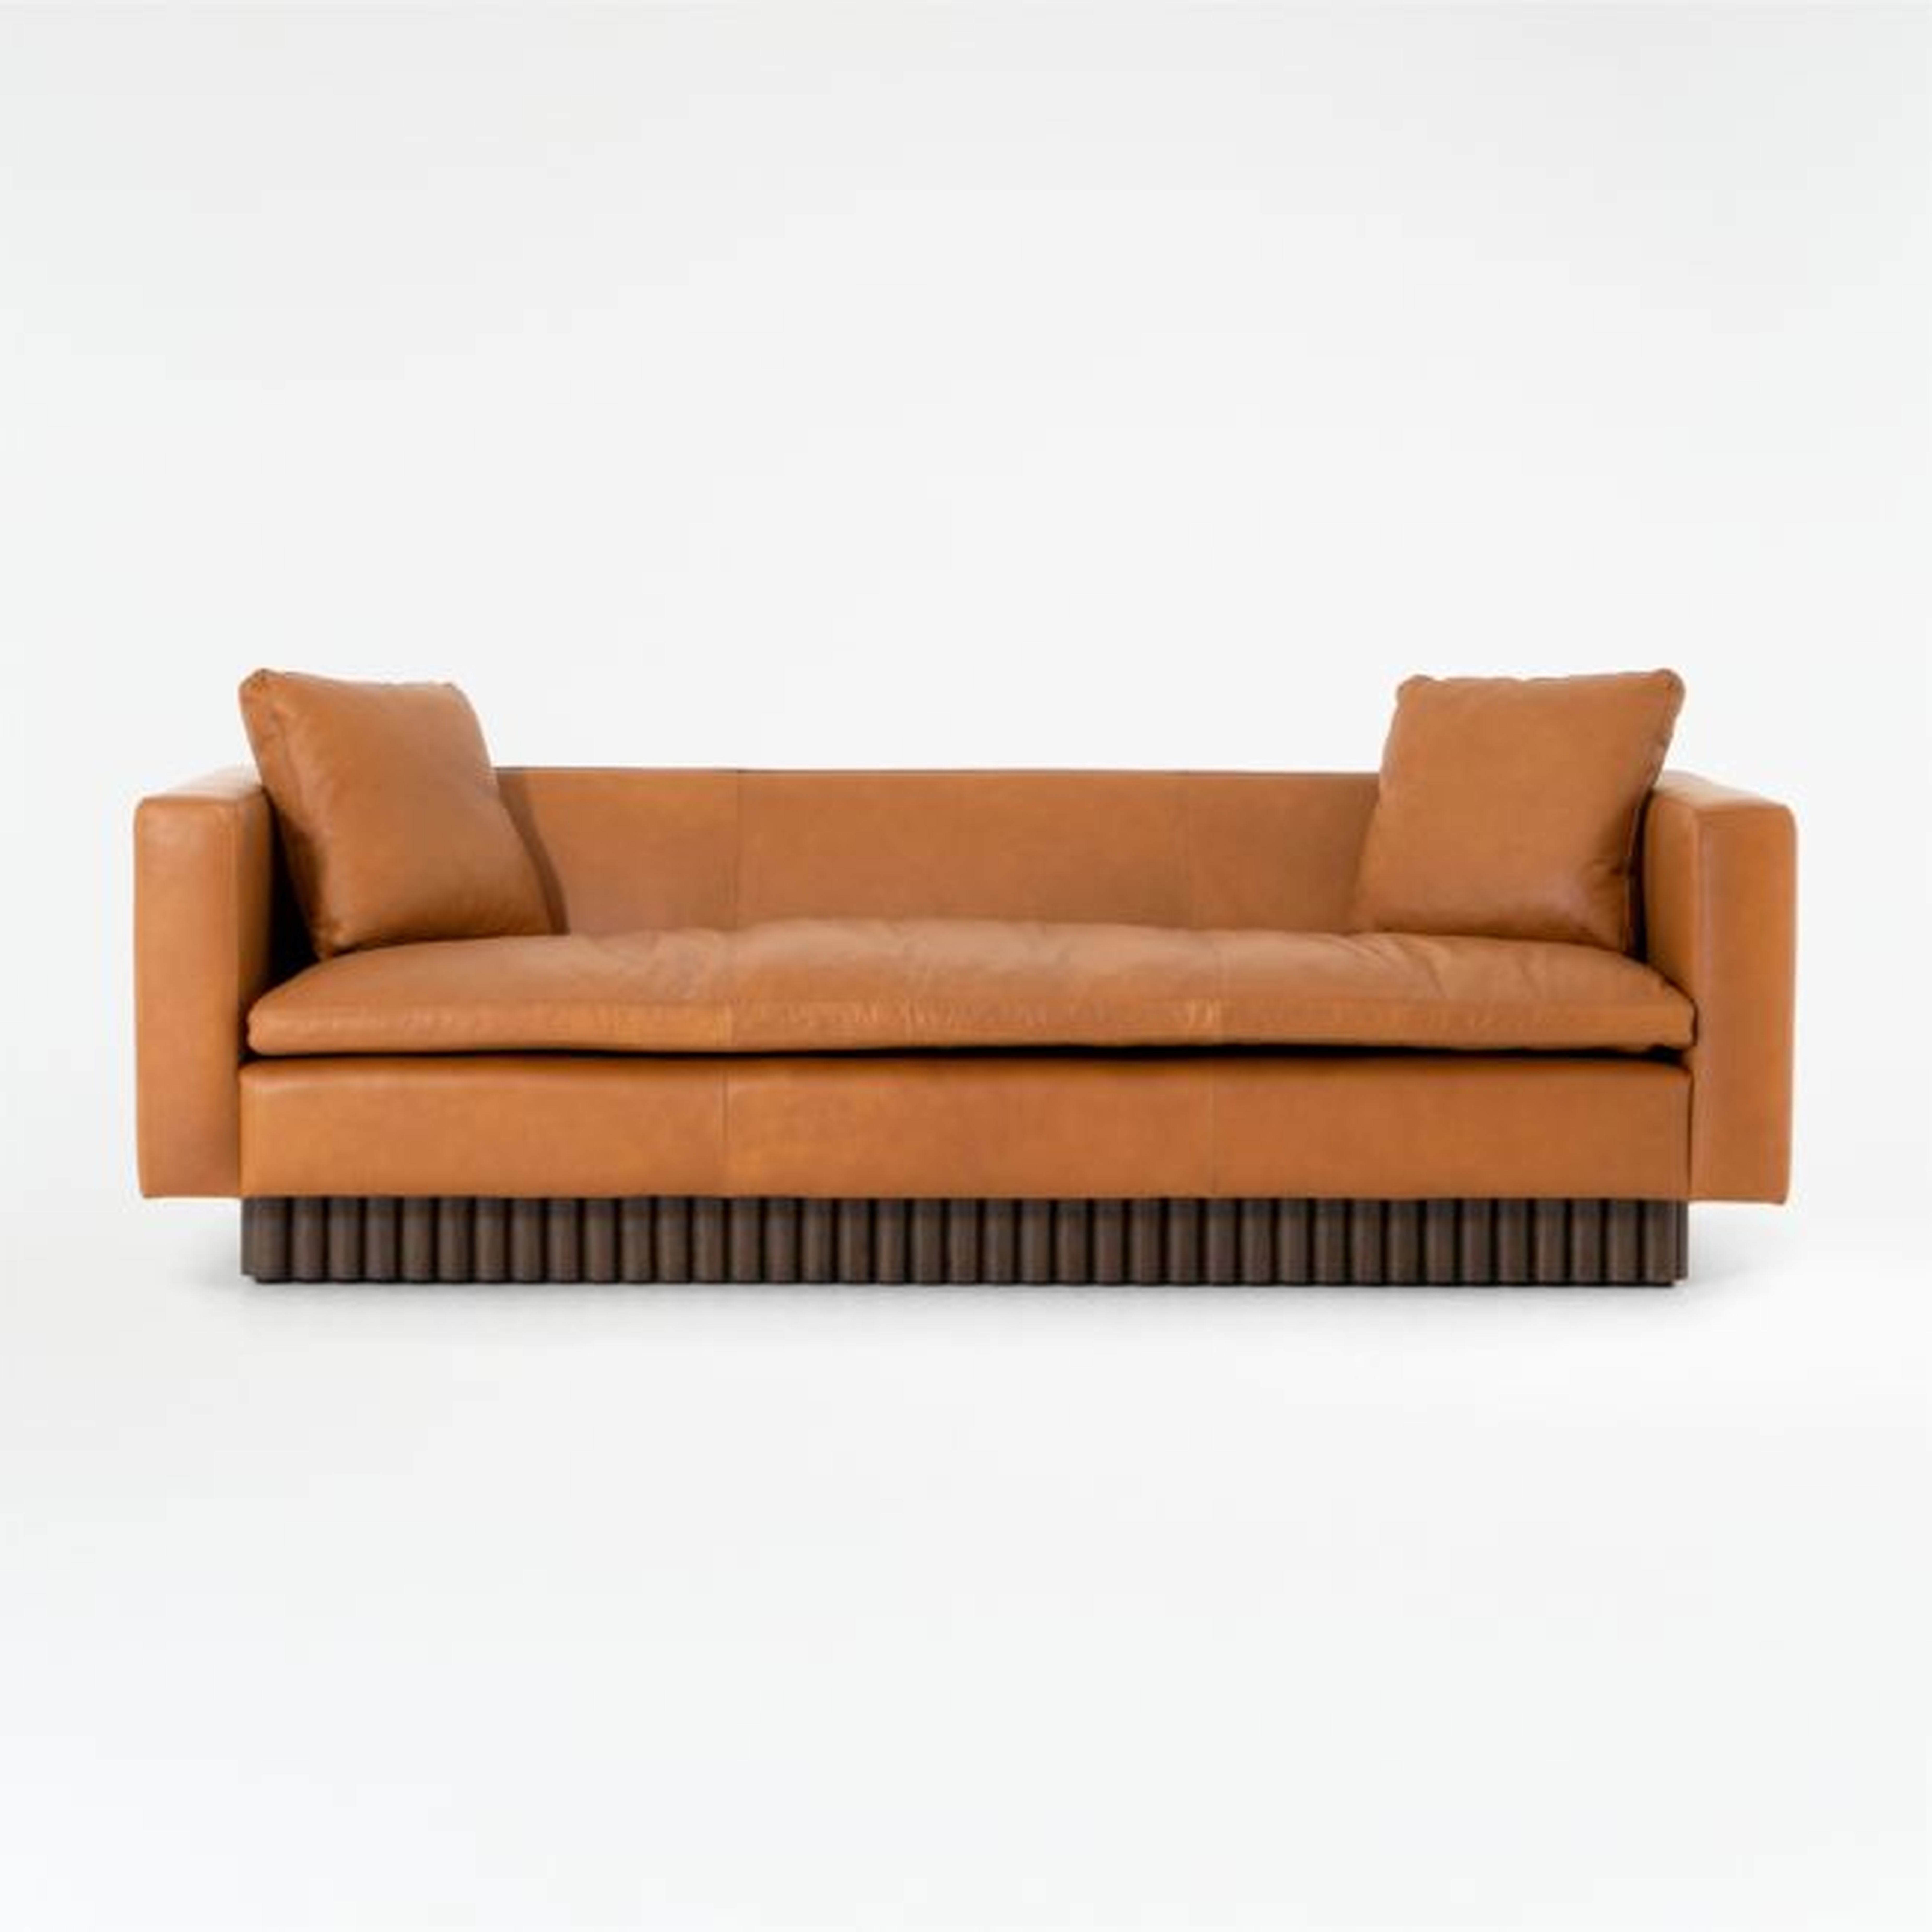 Topher 85" Leather Sofa - Crate and Barrel